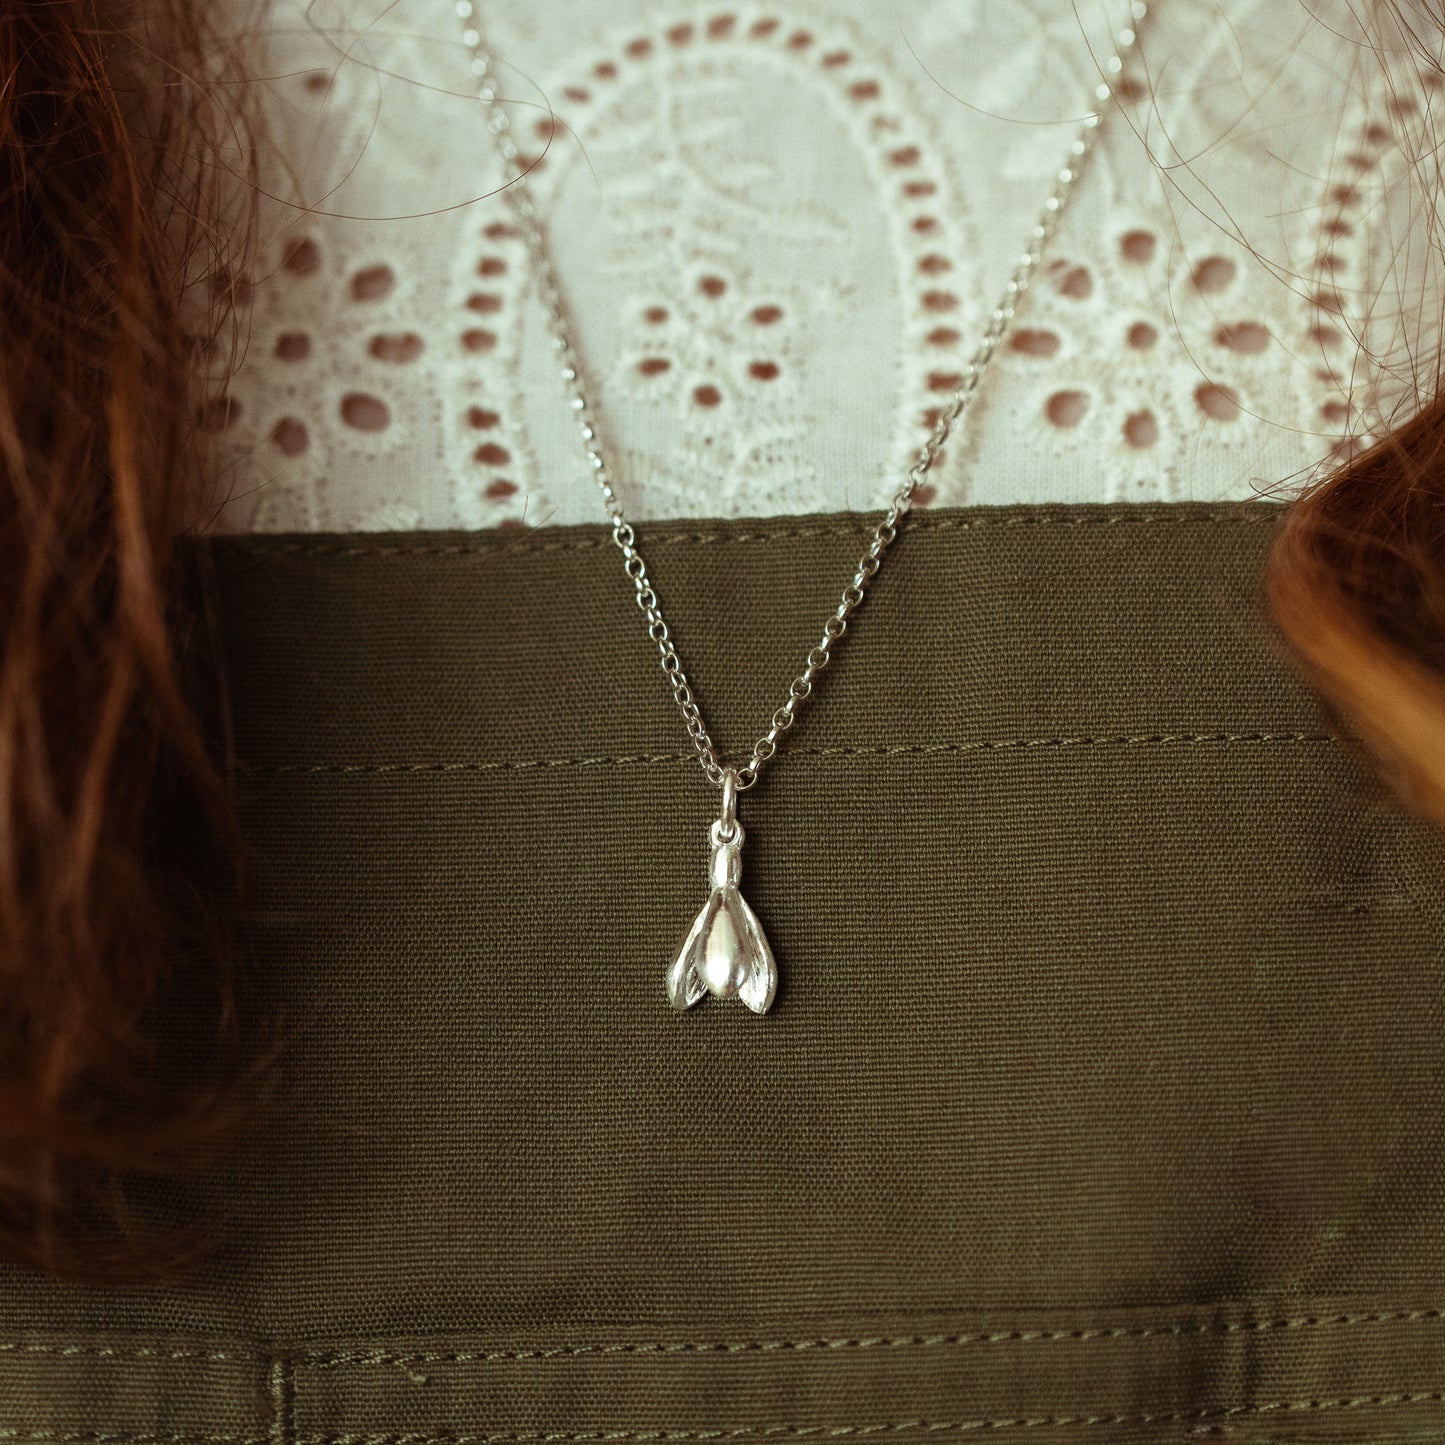 Small Silver Snowdrop Charm Necklace